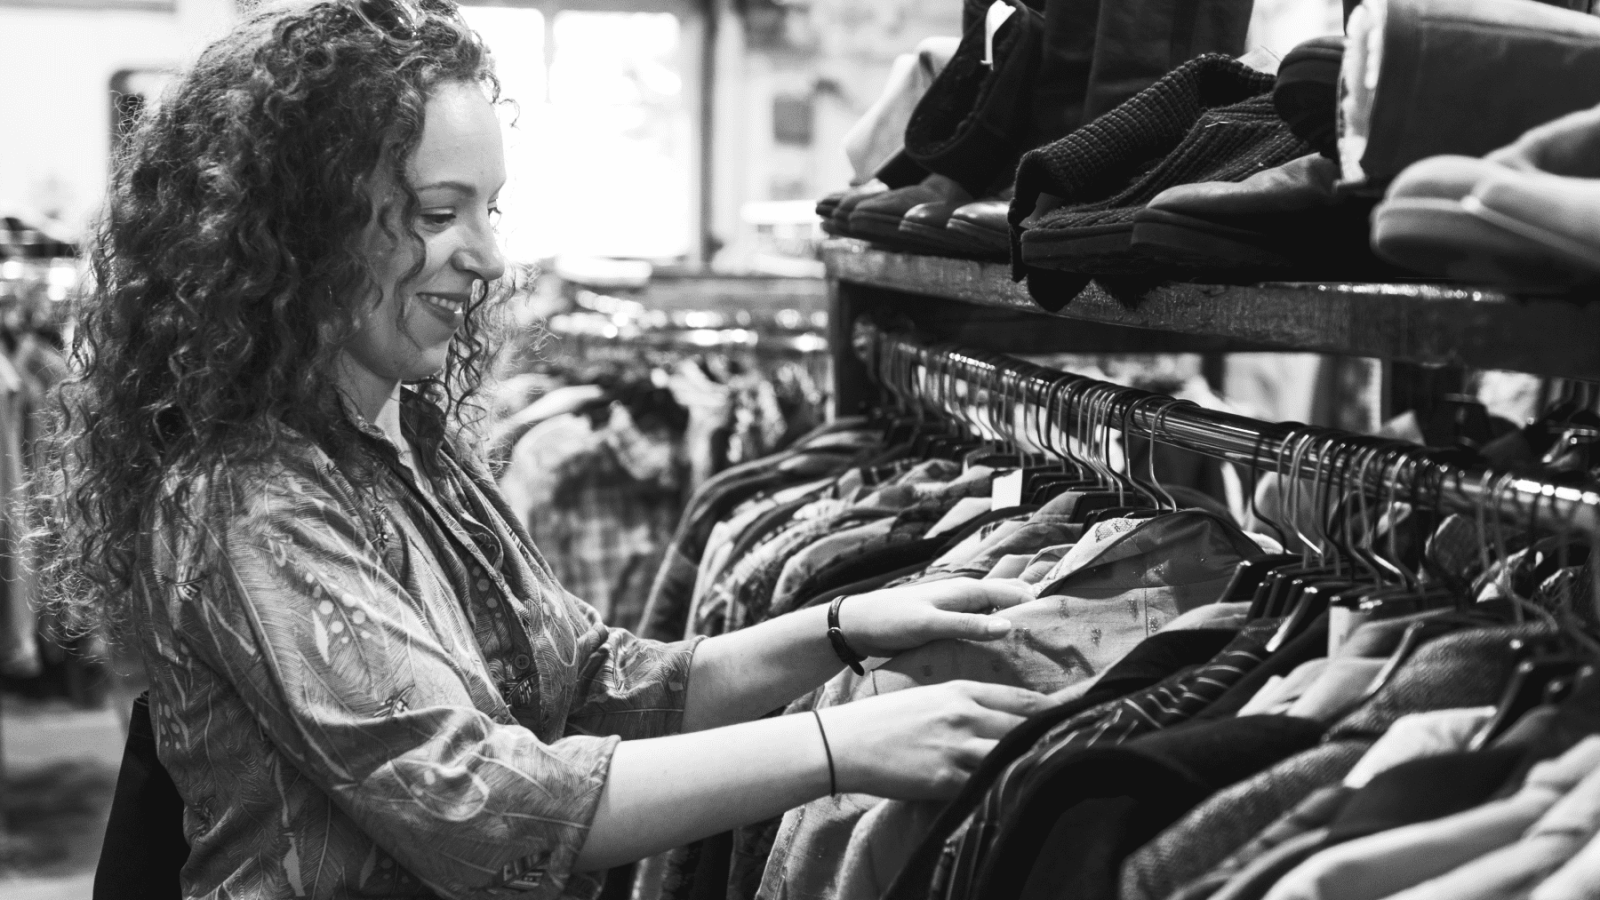 How Business Leaders Can Encourage More Sustainable Fashion Practices